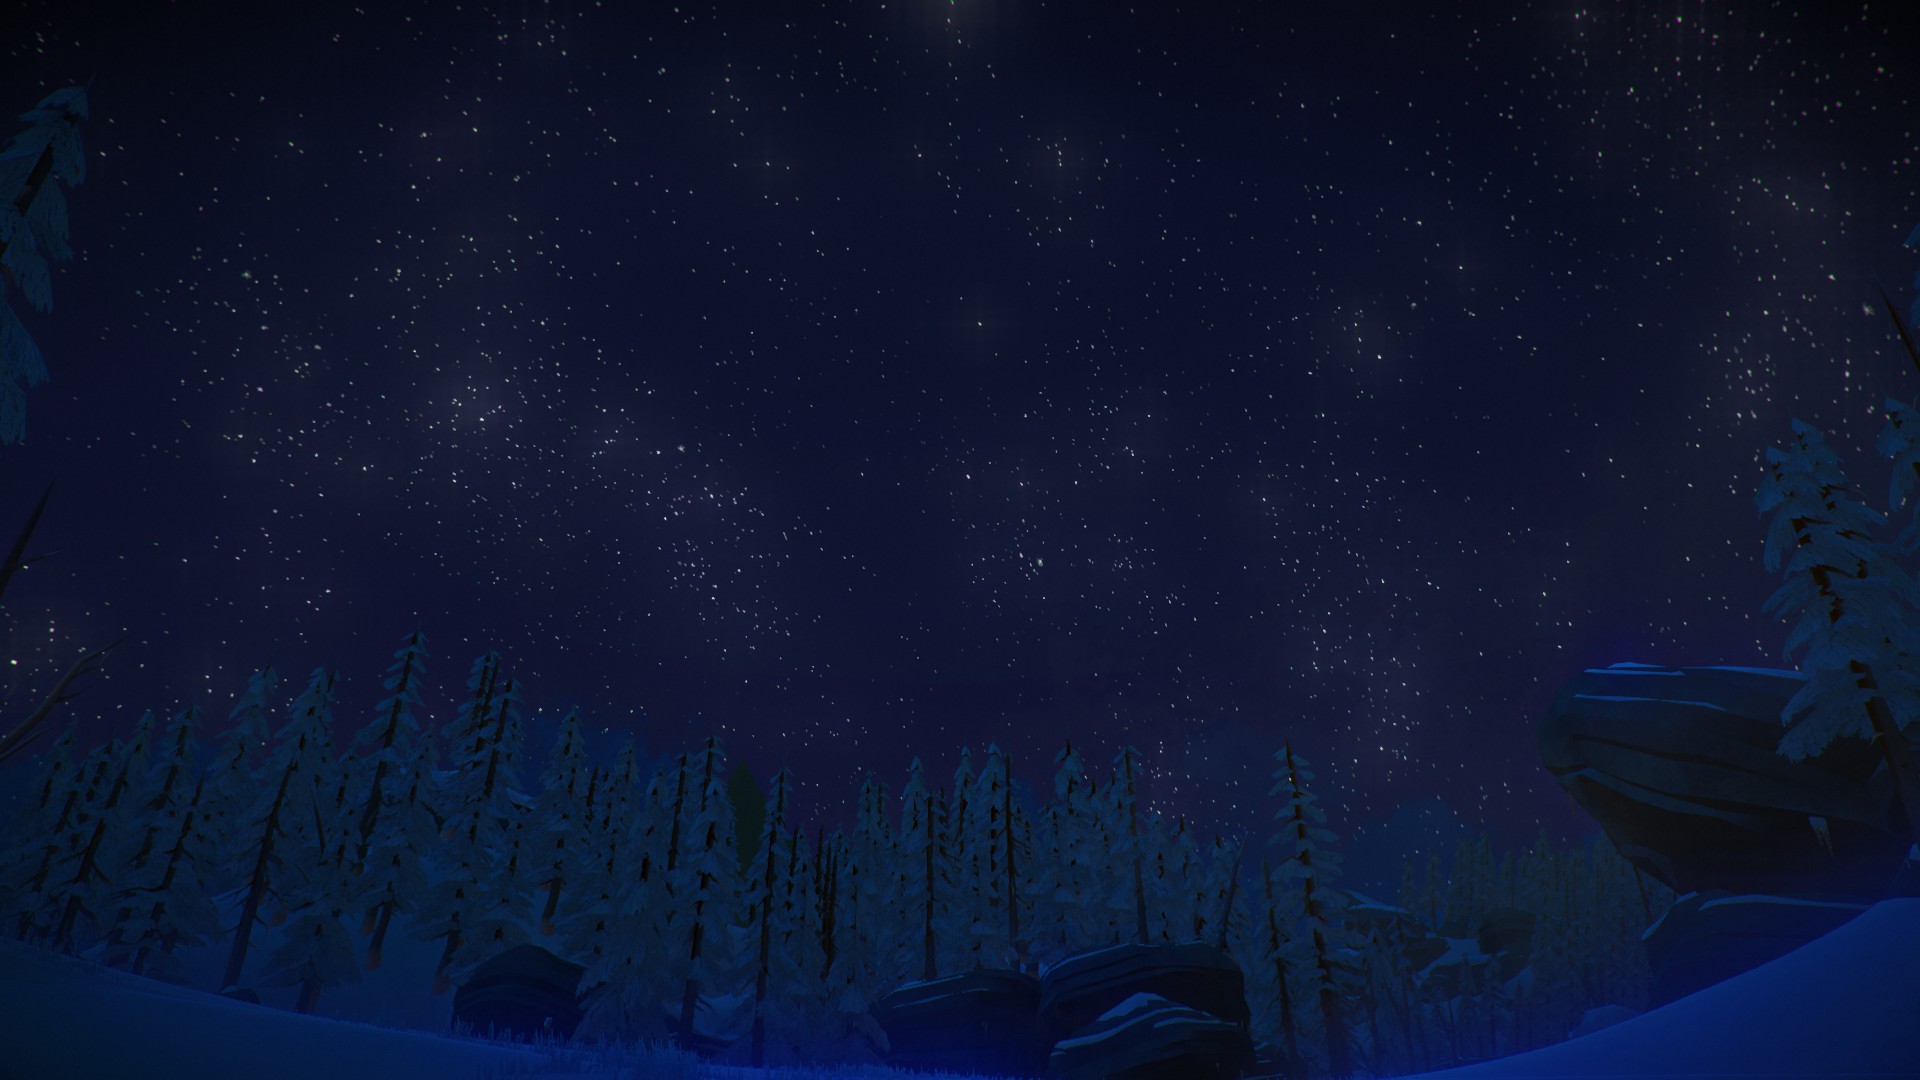 the long dark, video game, forest, night, sky, snow, stars, winter, wood